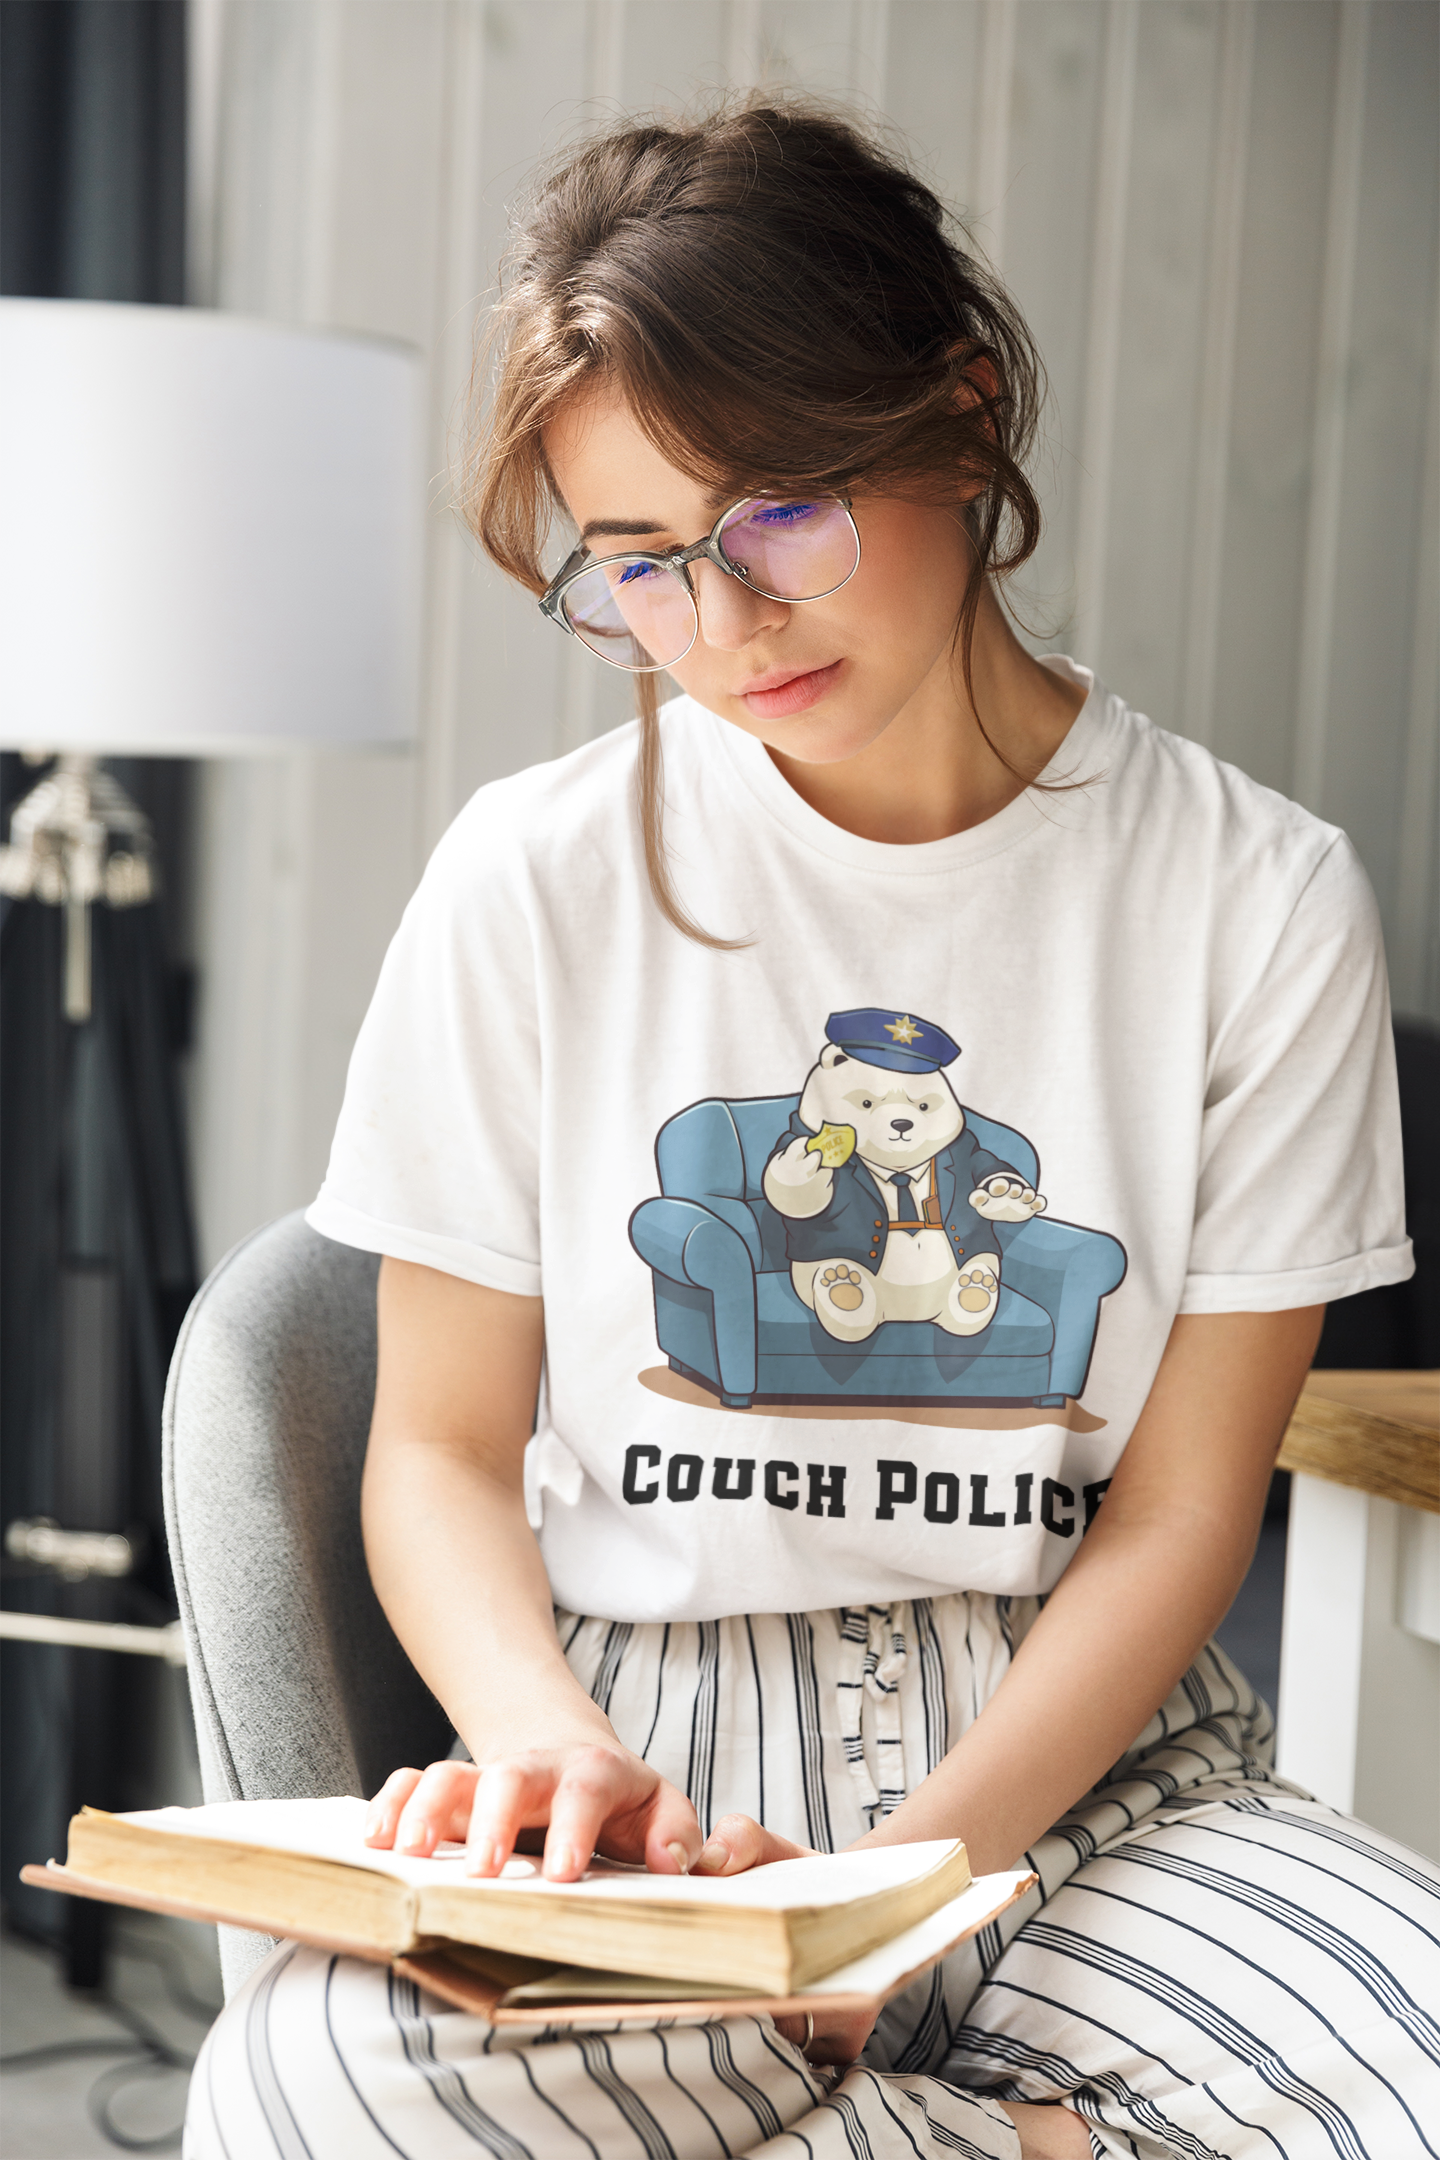 Funny Shirt - Couch Police - Unisex - Softstyle T-Shirt